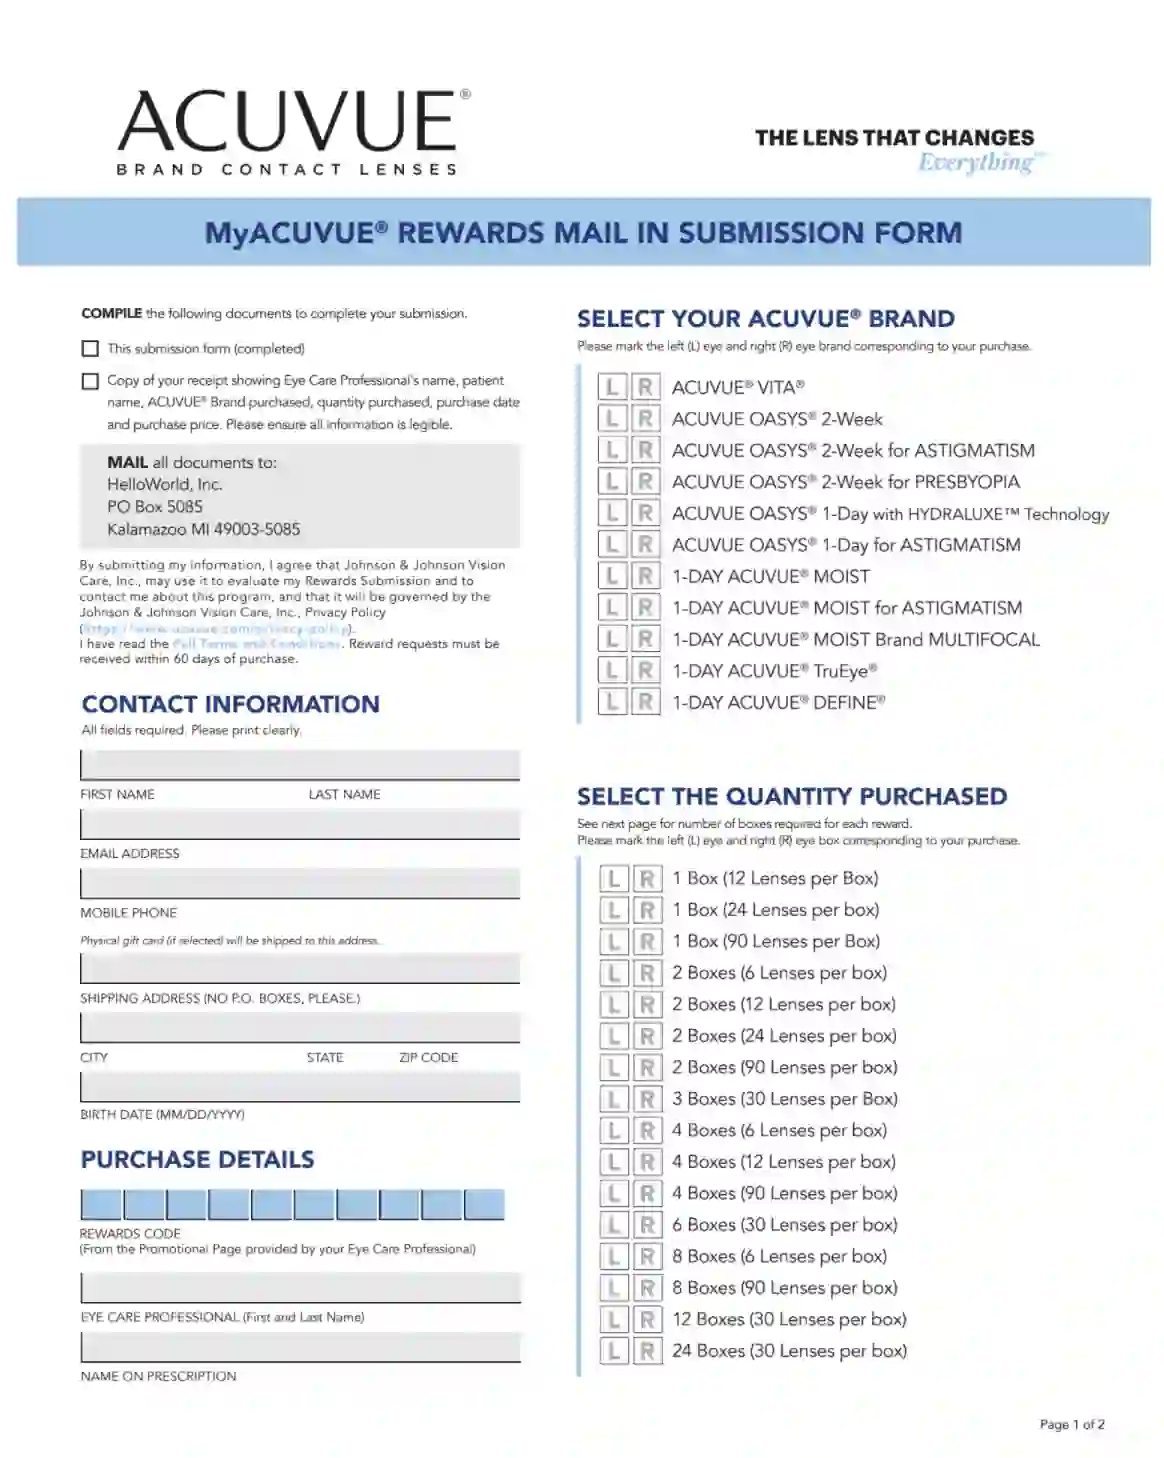 myacuvue rewards submission form